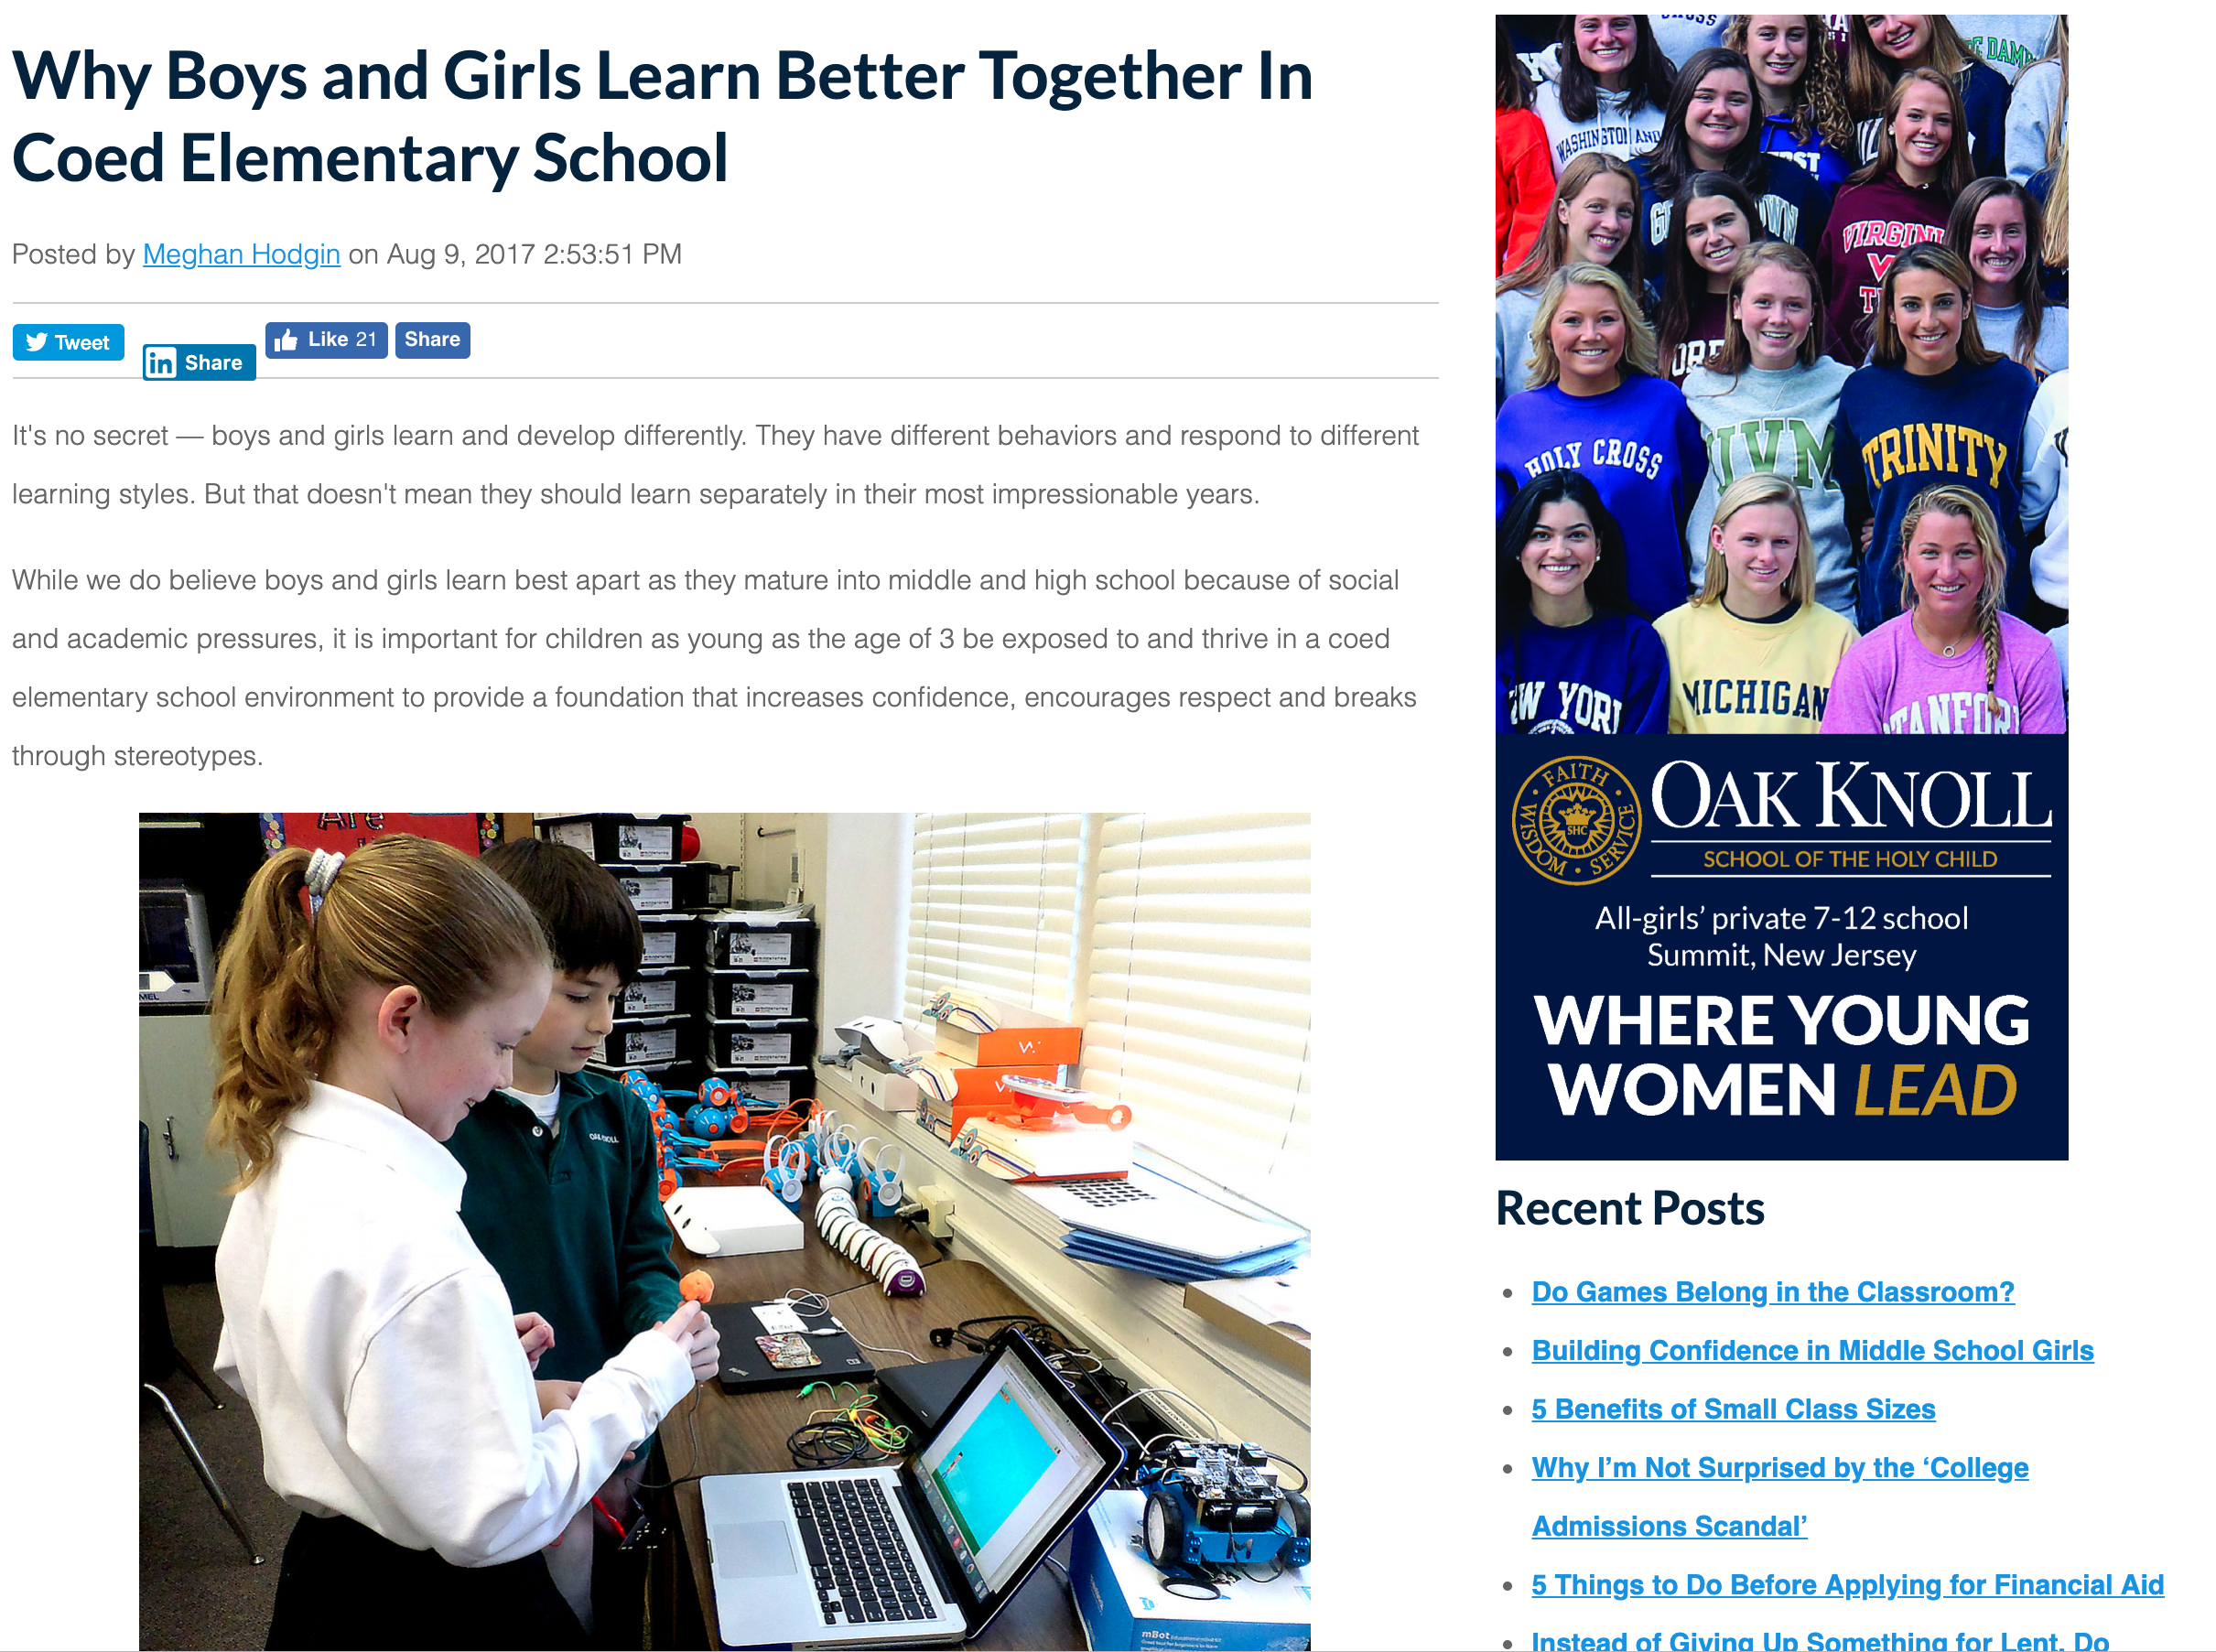 Why Boys and Girls Learn Better Together in Coed Elementary School - Oak Knoll School of the Holy Child